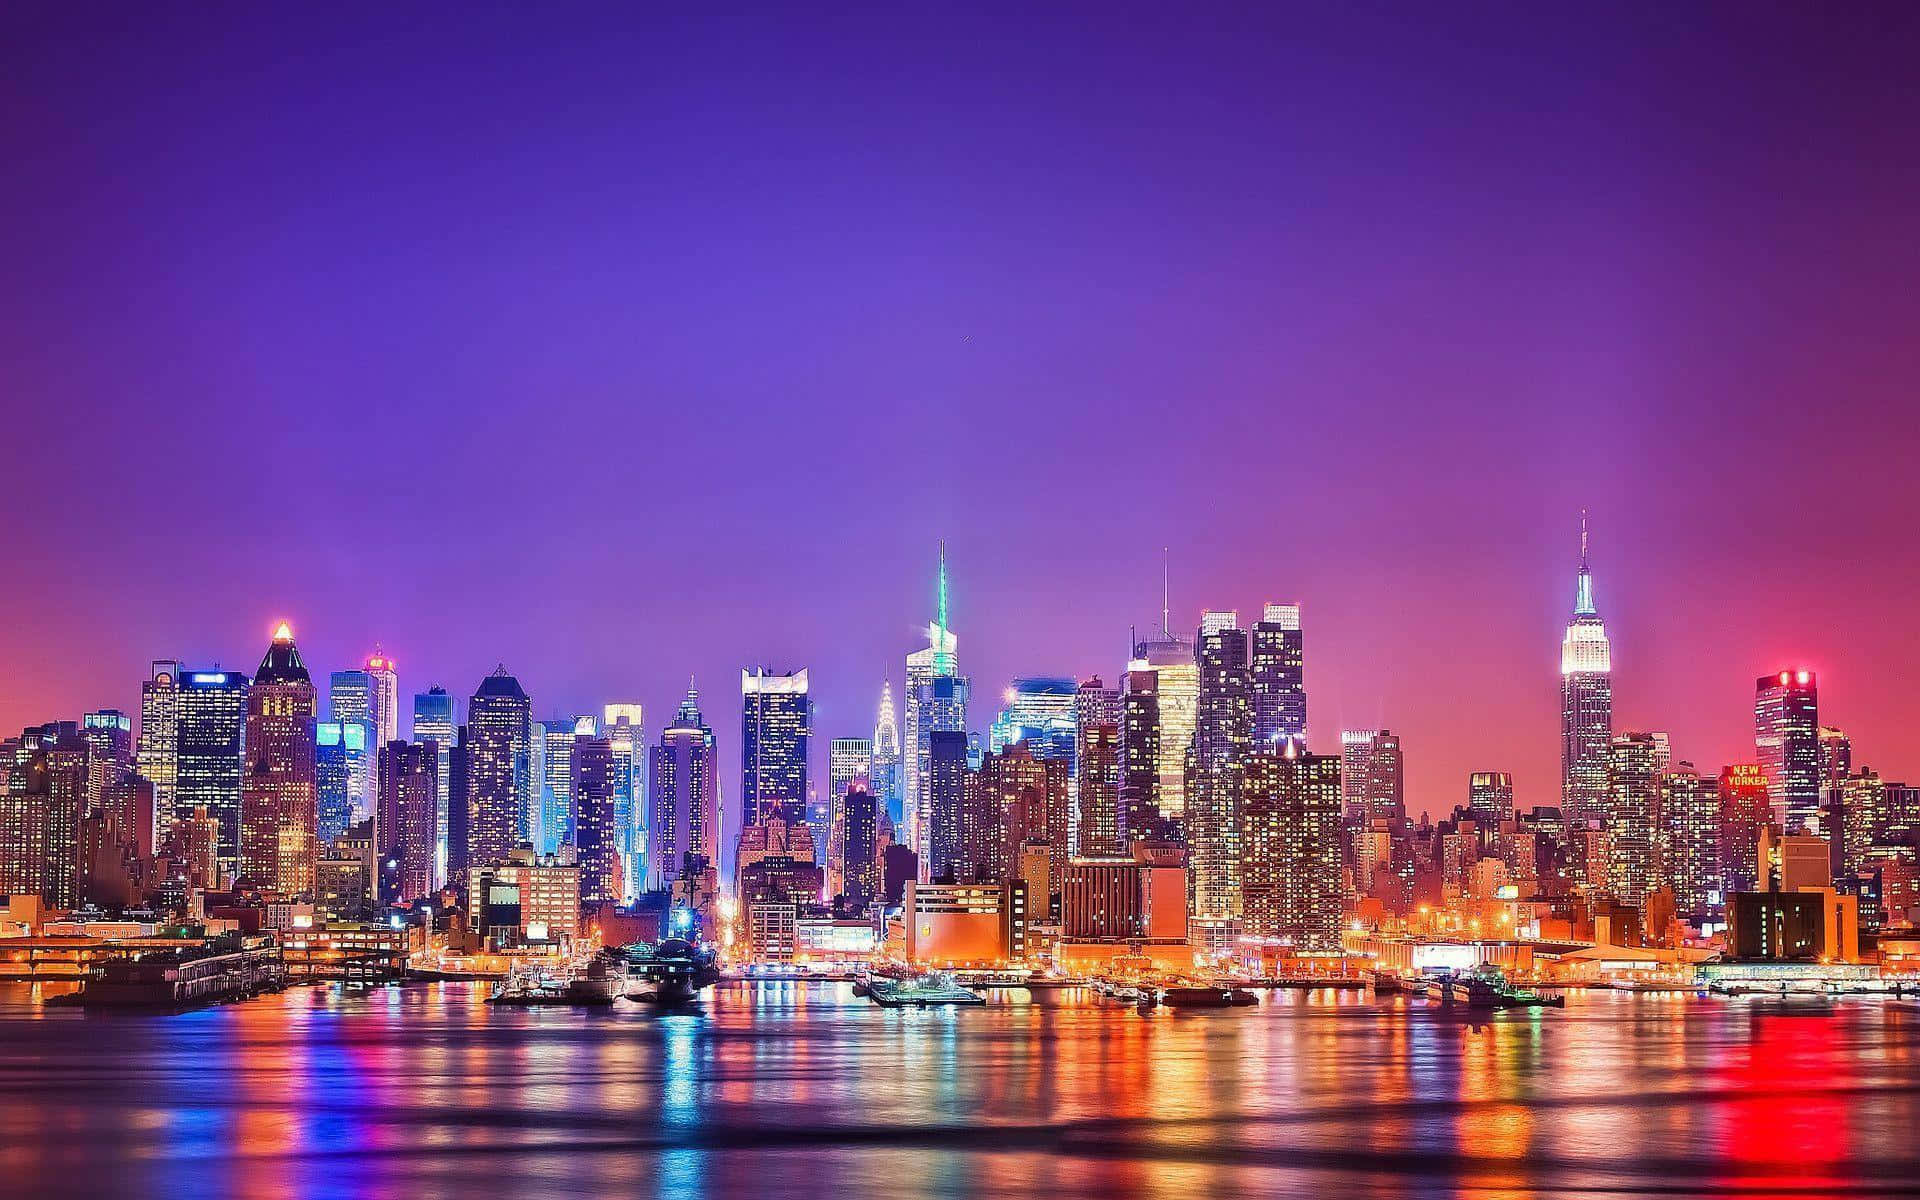 New York City At Night With Colorful Lights